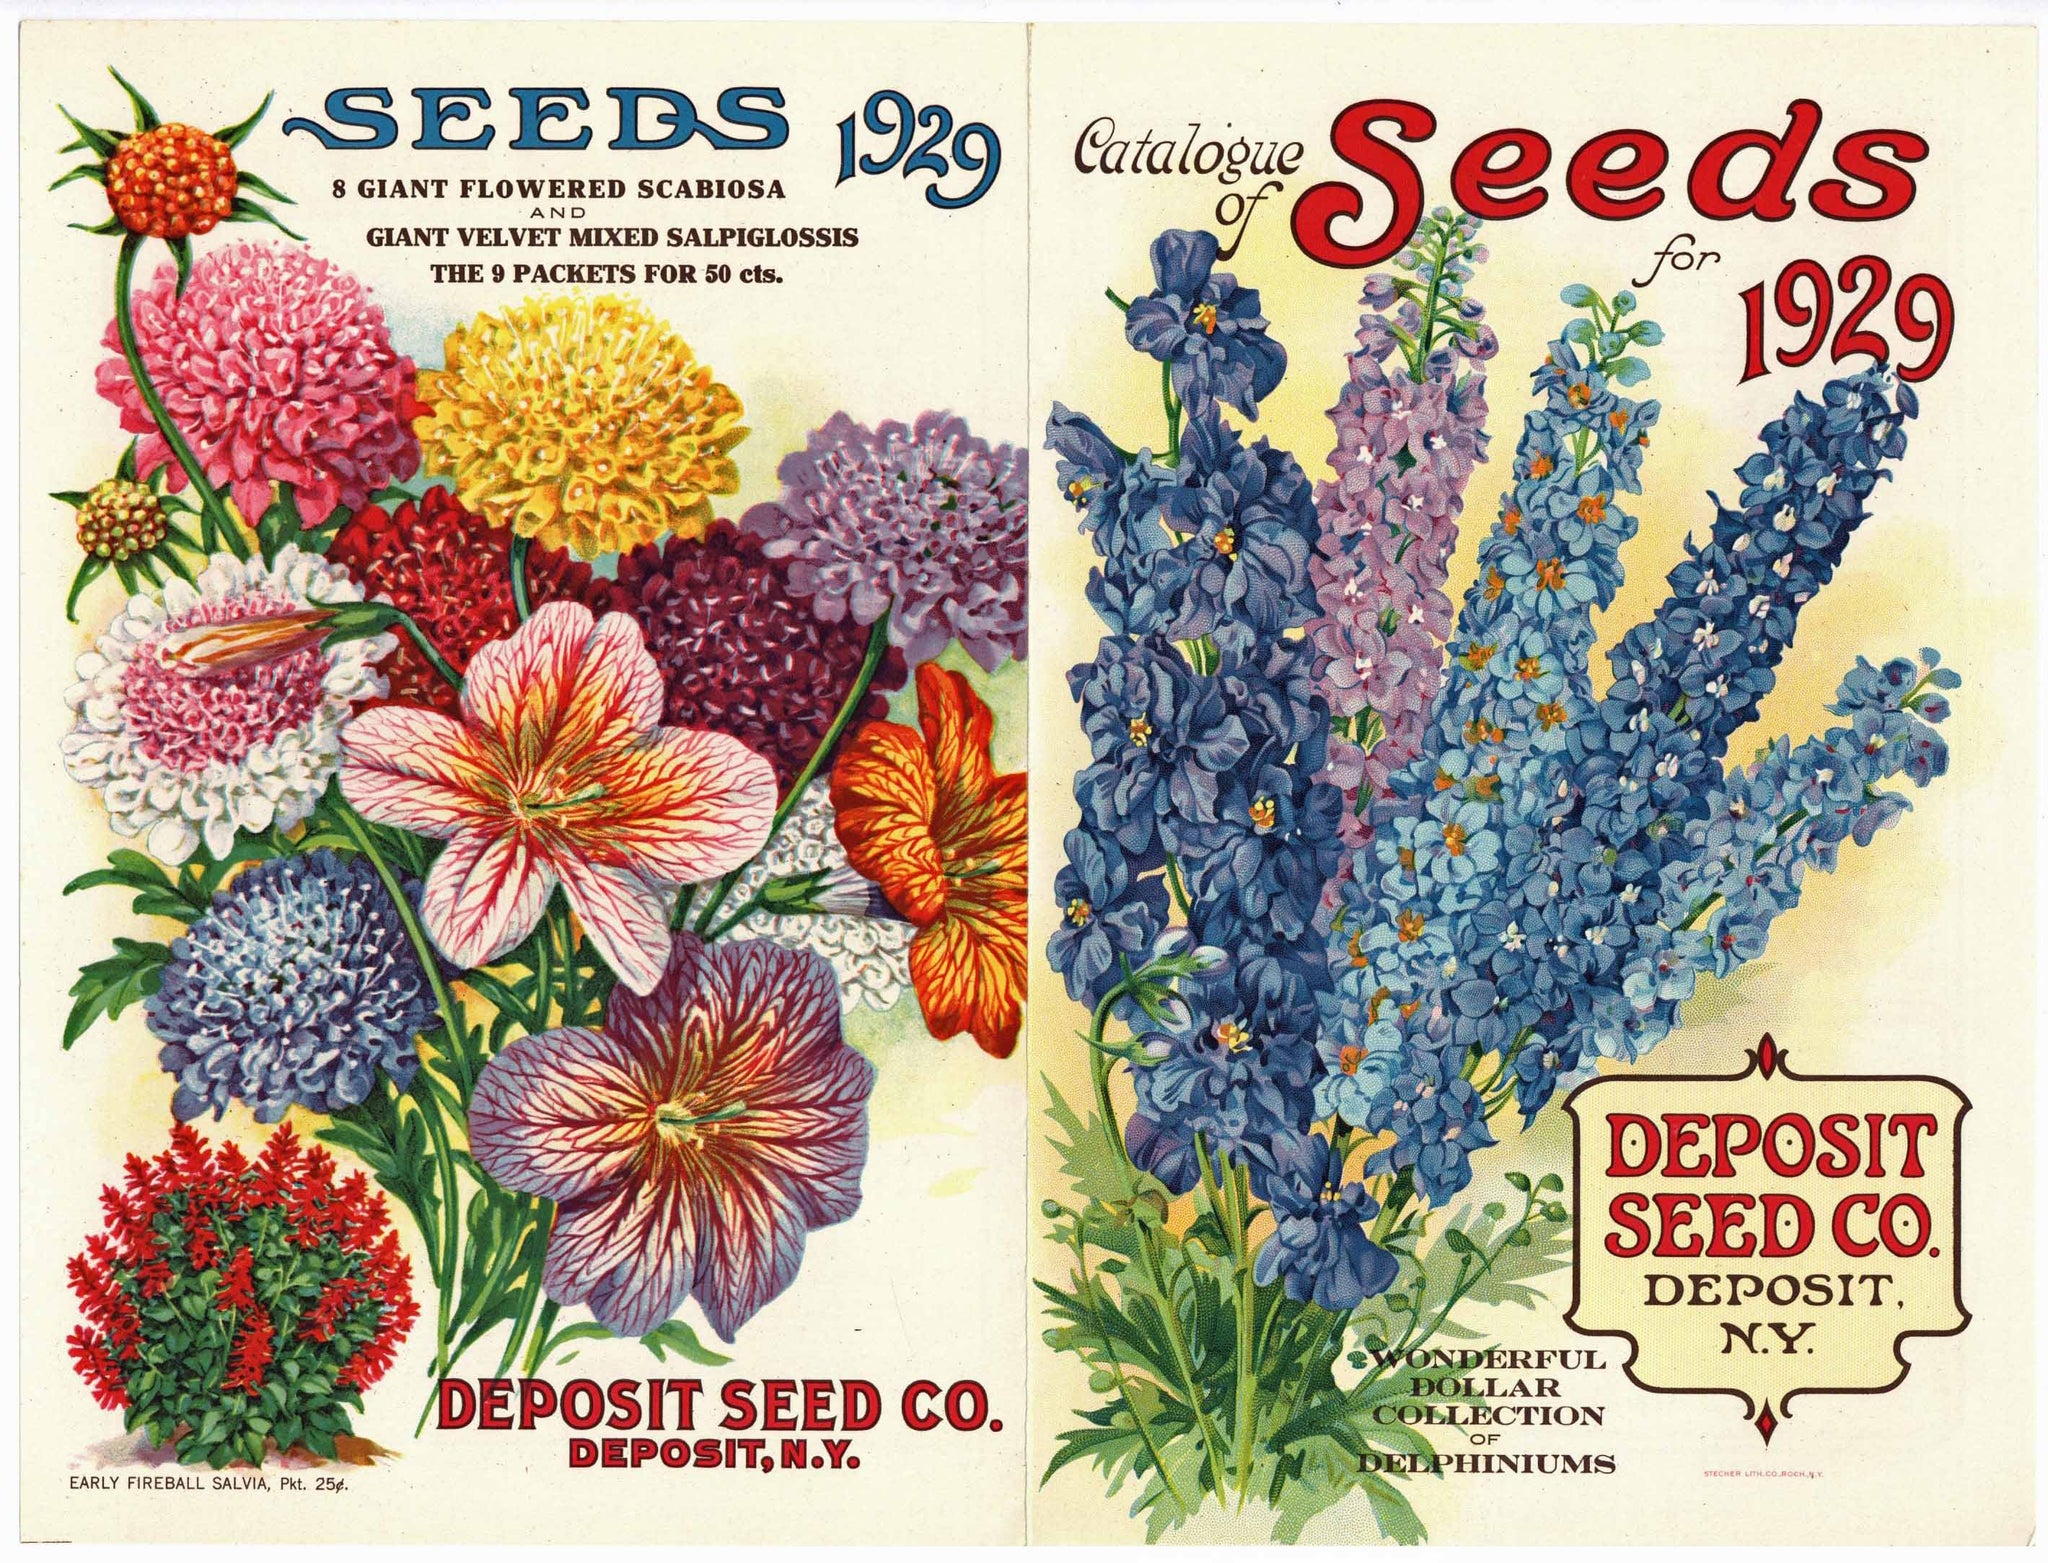 A Catalogue of Seeds for 1929, Deposit Seed Co., Antique